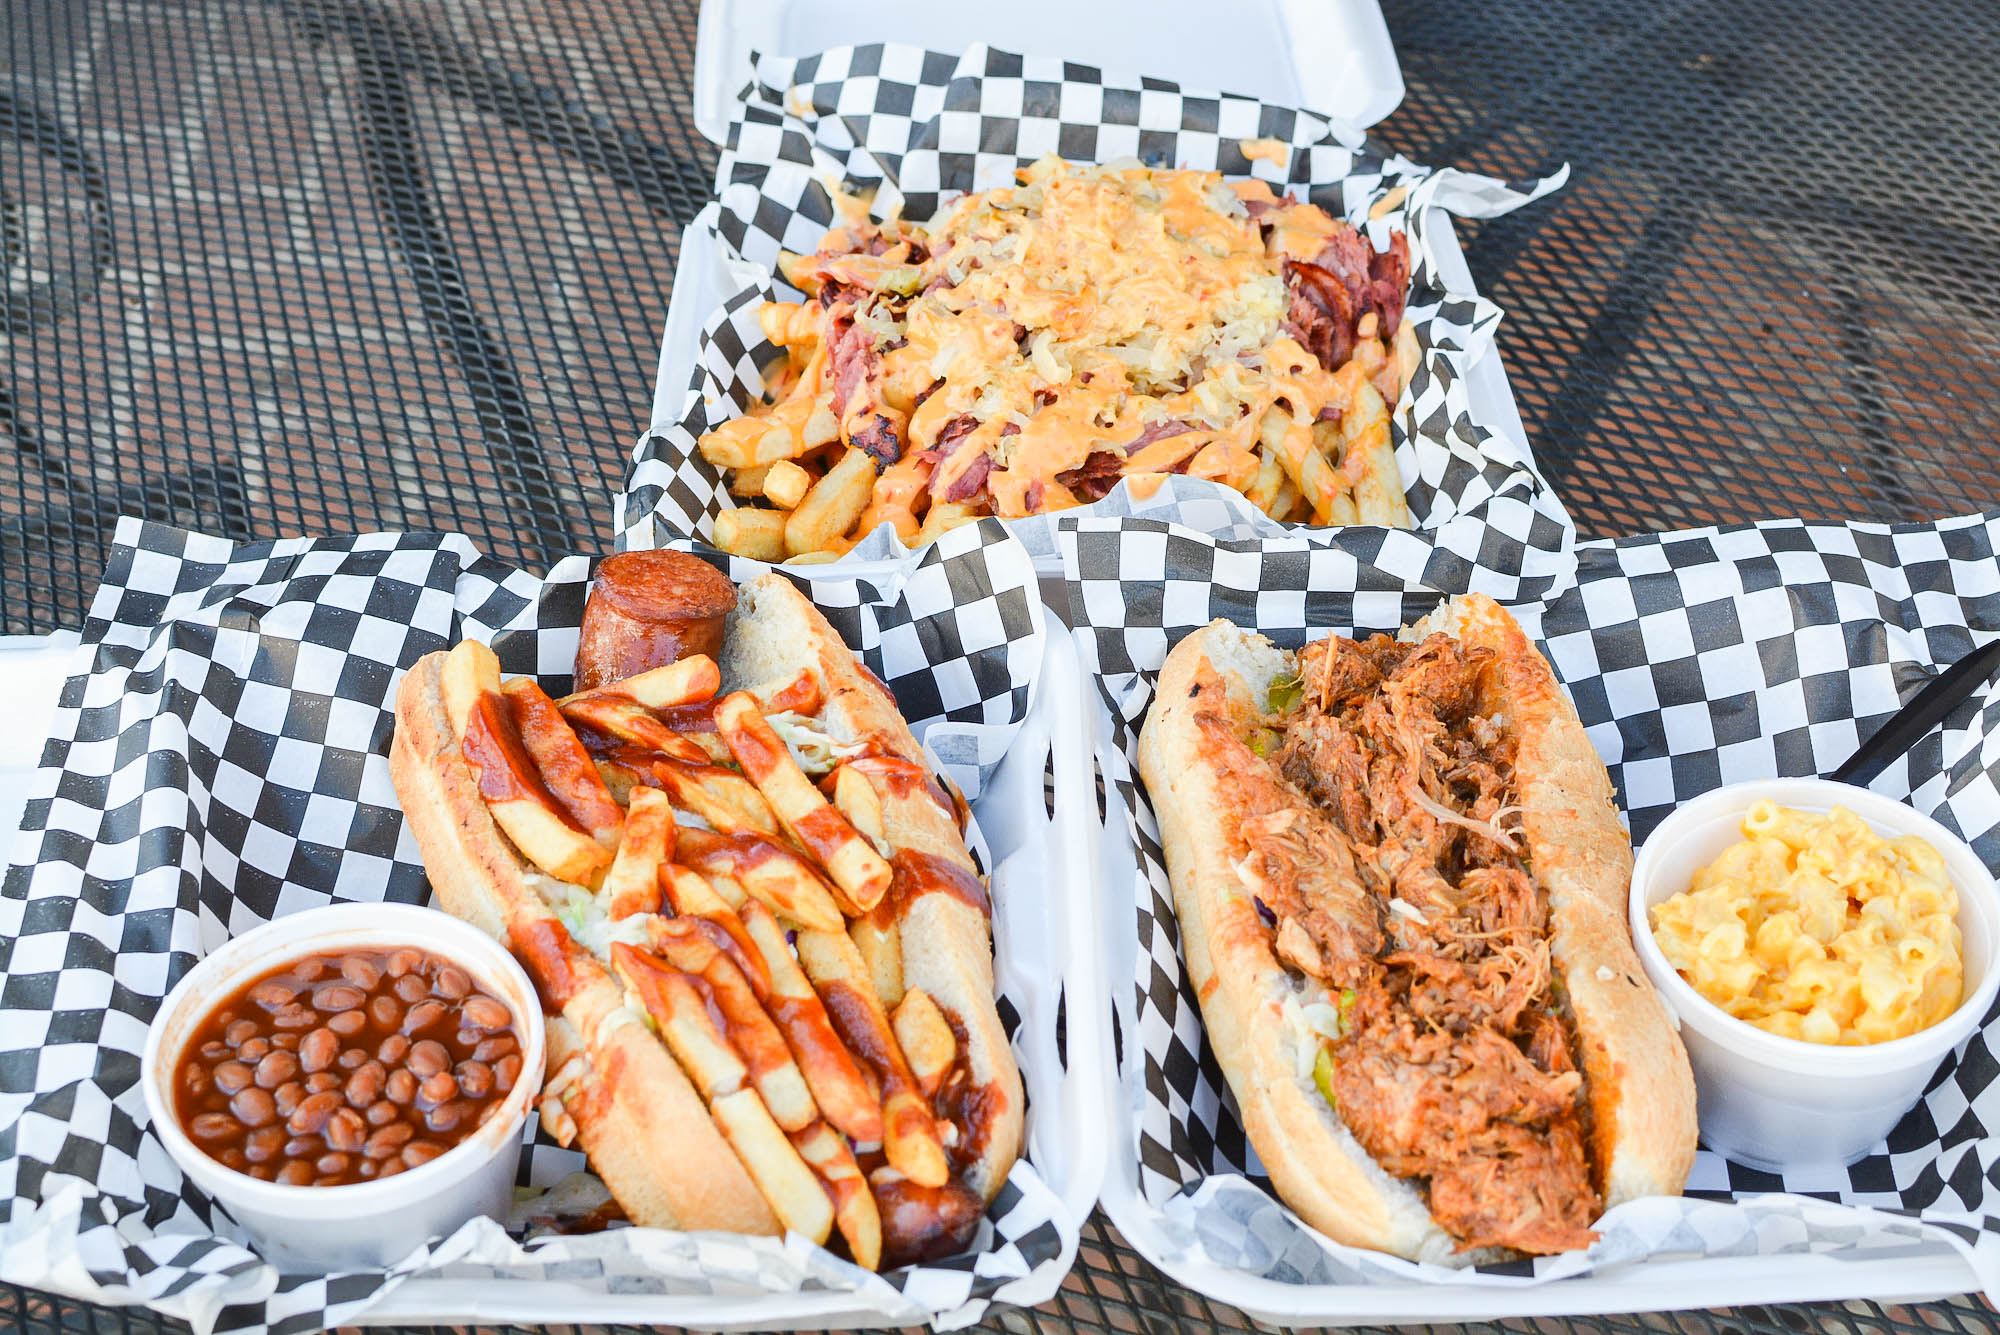 Pastrami fries, sandwiches, and more from a takeout restaurant.